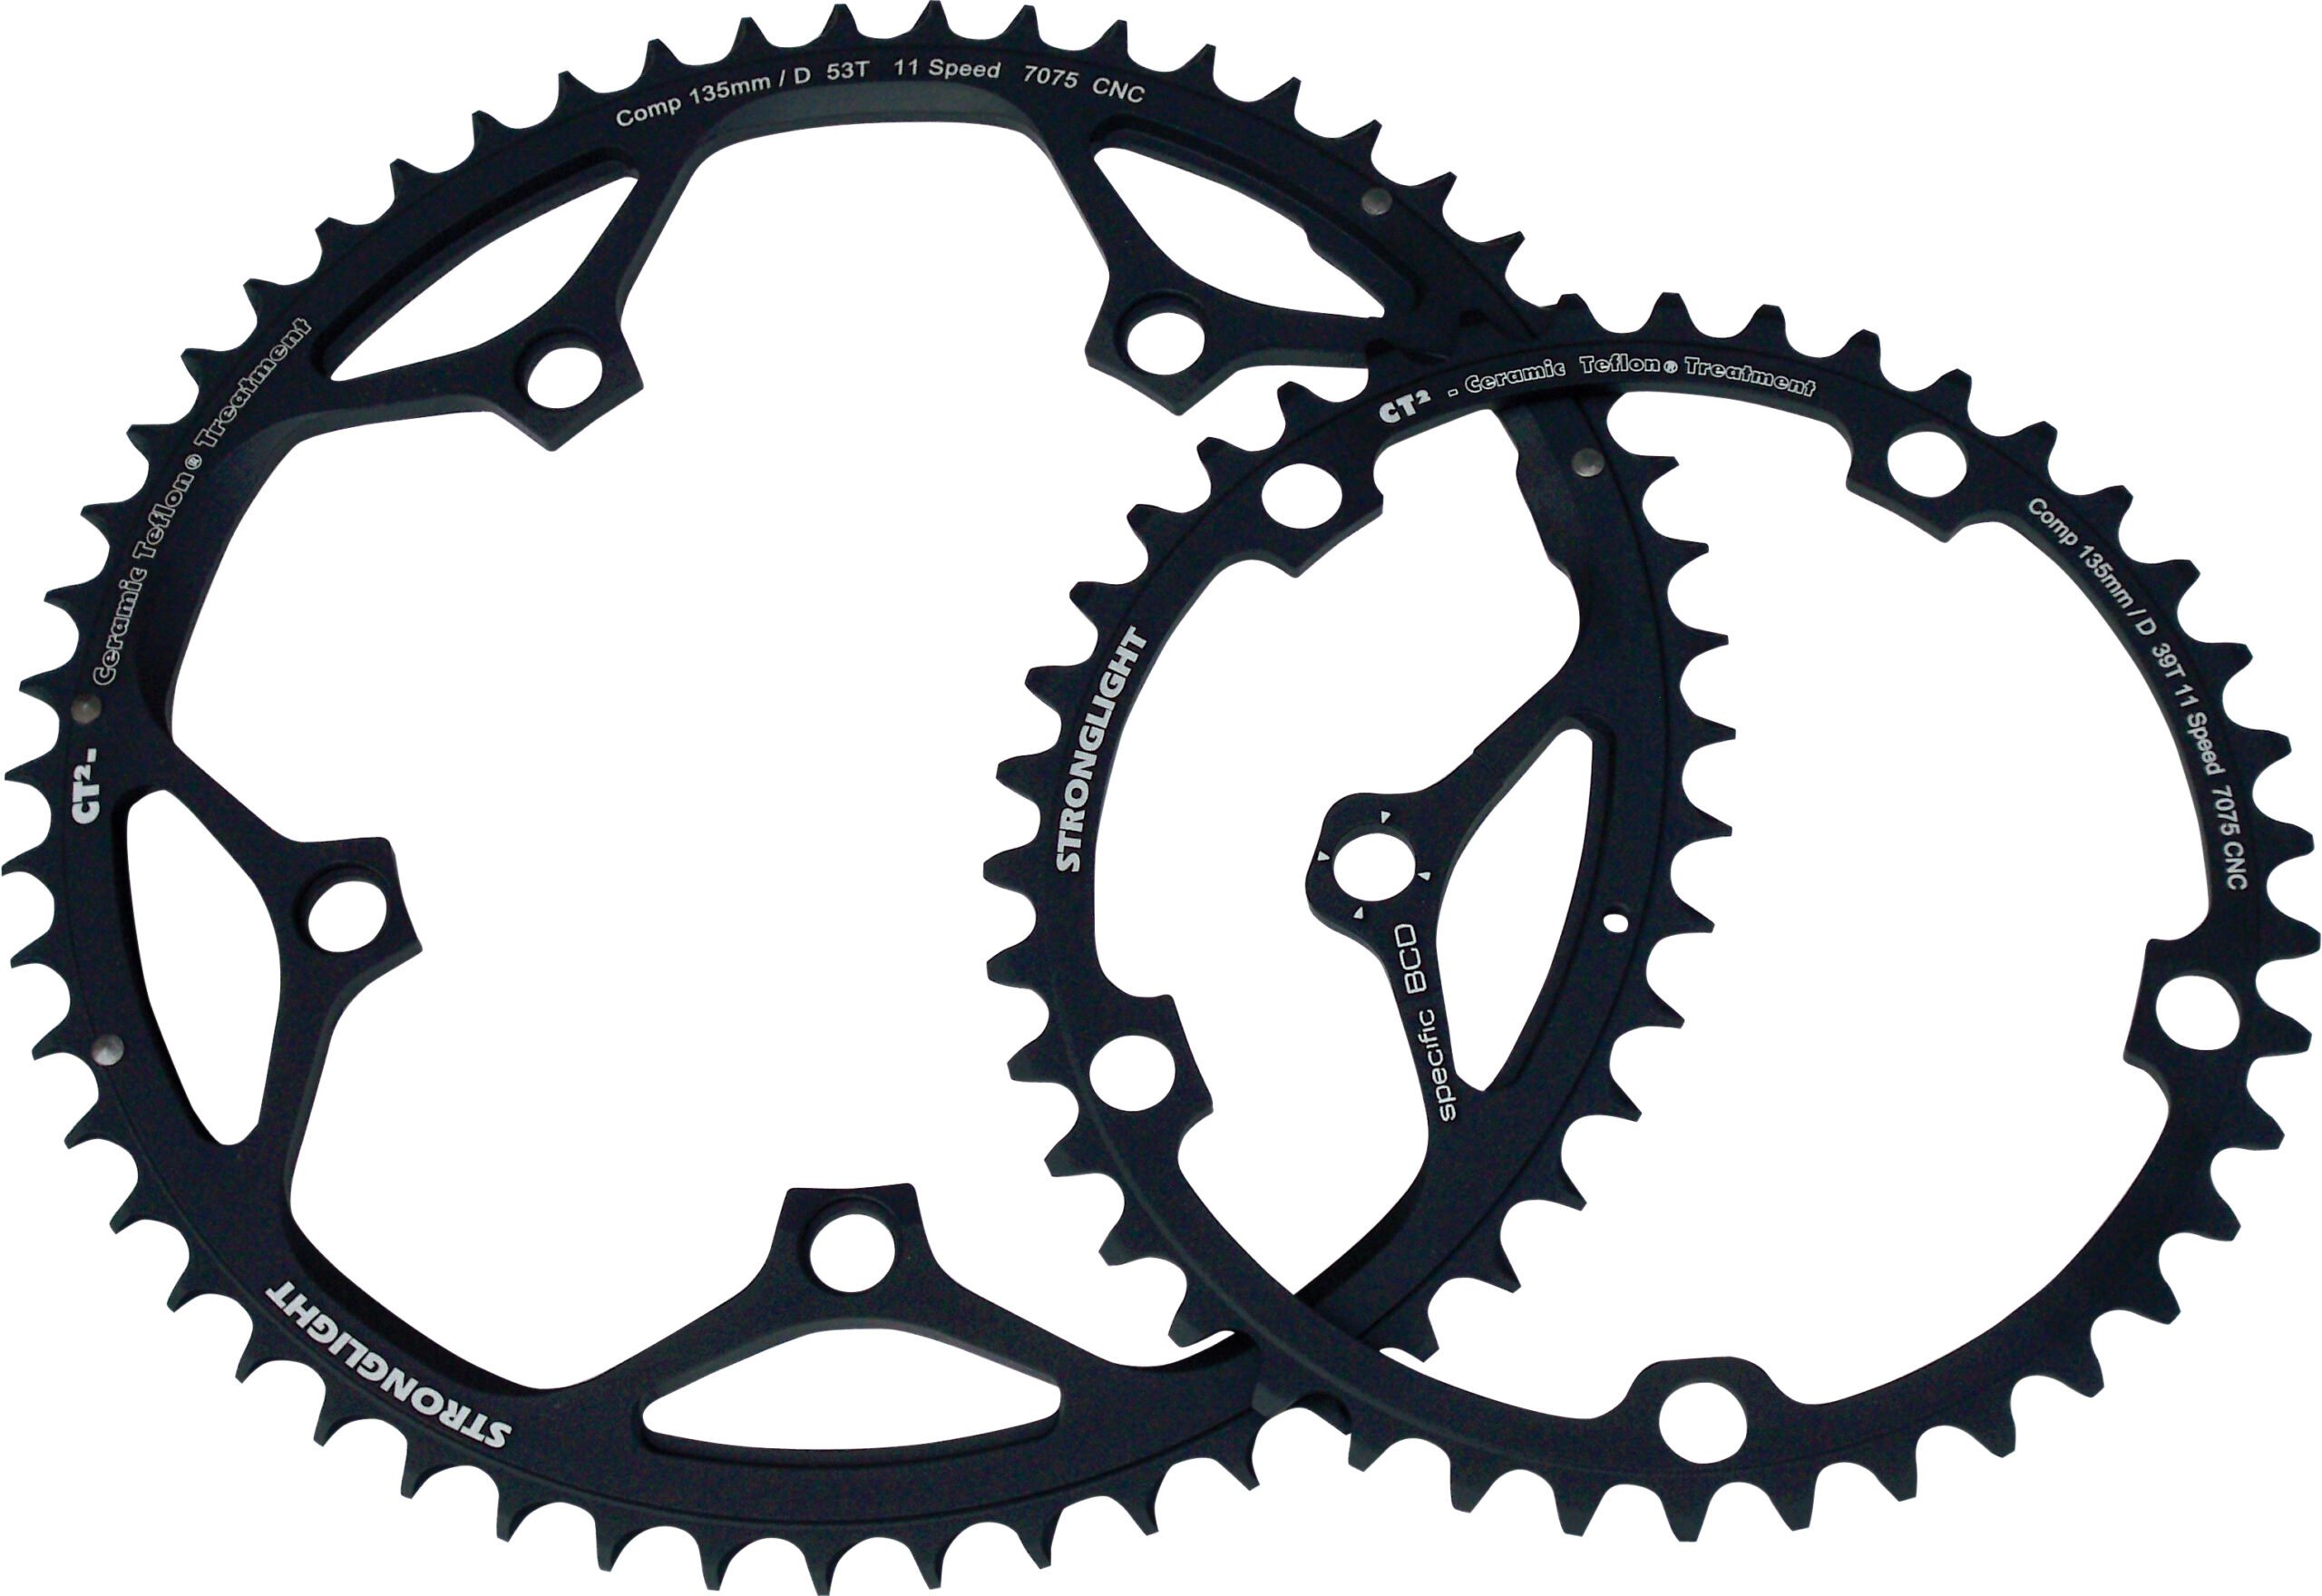 CTD13549 Stronglight 49T CT2 5-Arm/135mm Chainring